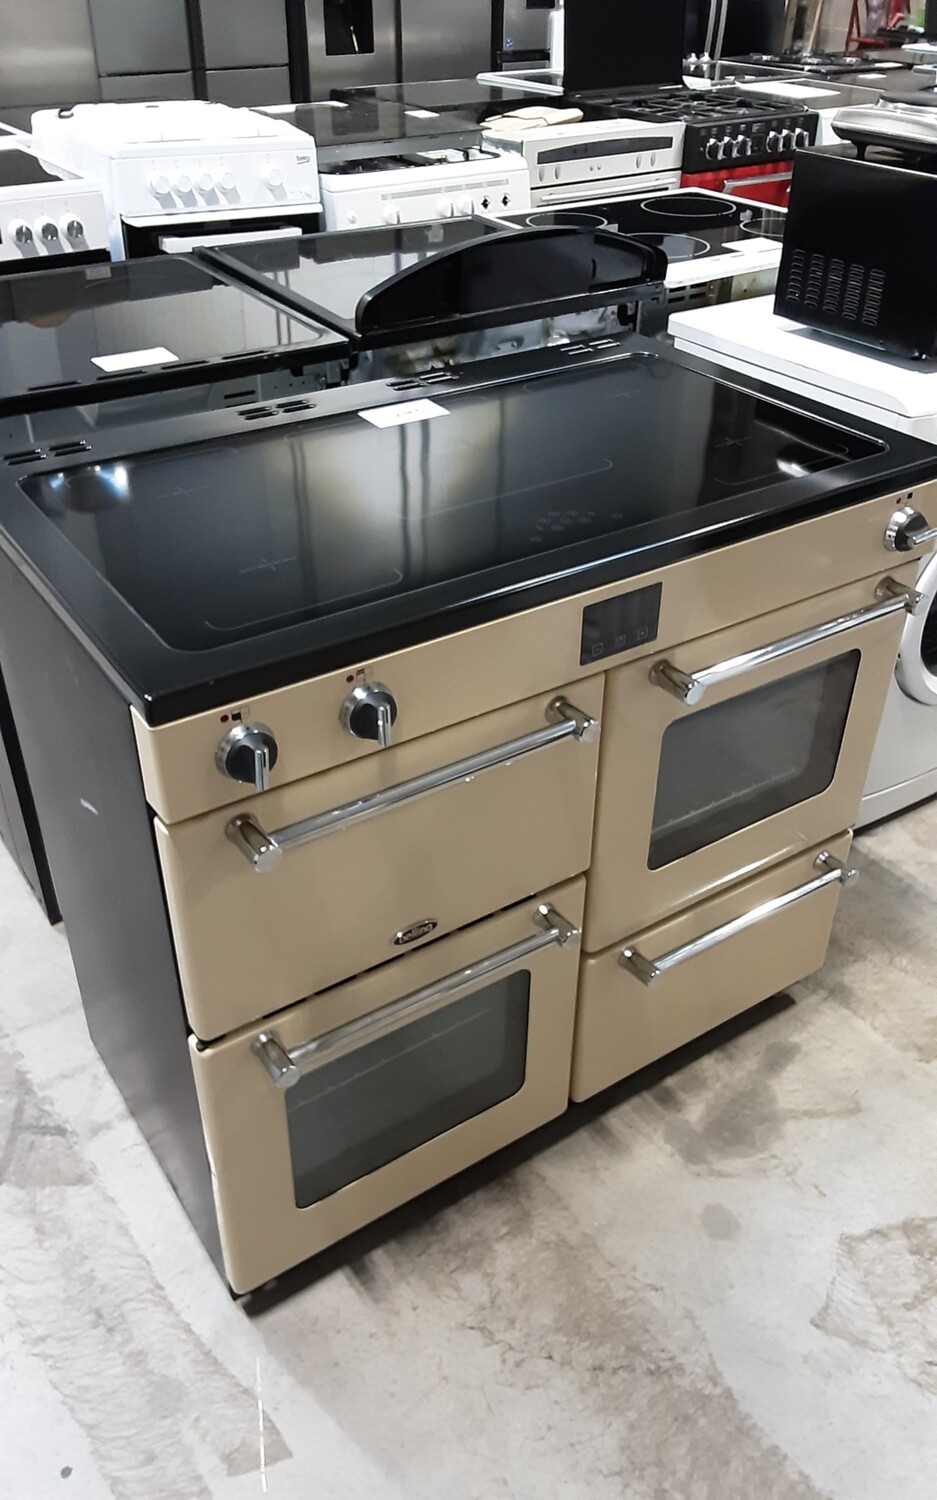 Belling Kensington 100Ei 444444064 100cm Electric Cooker fan oven with Induction Hob - Cream - Refurbished 6 Month Guarantee 